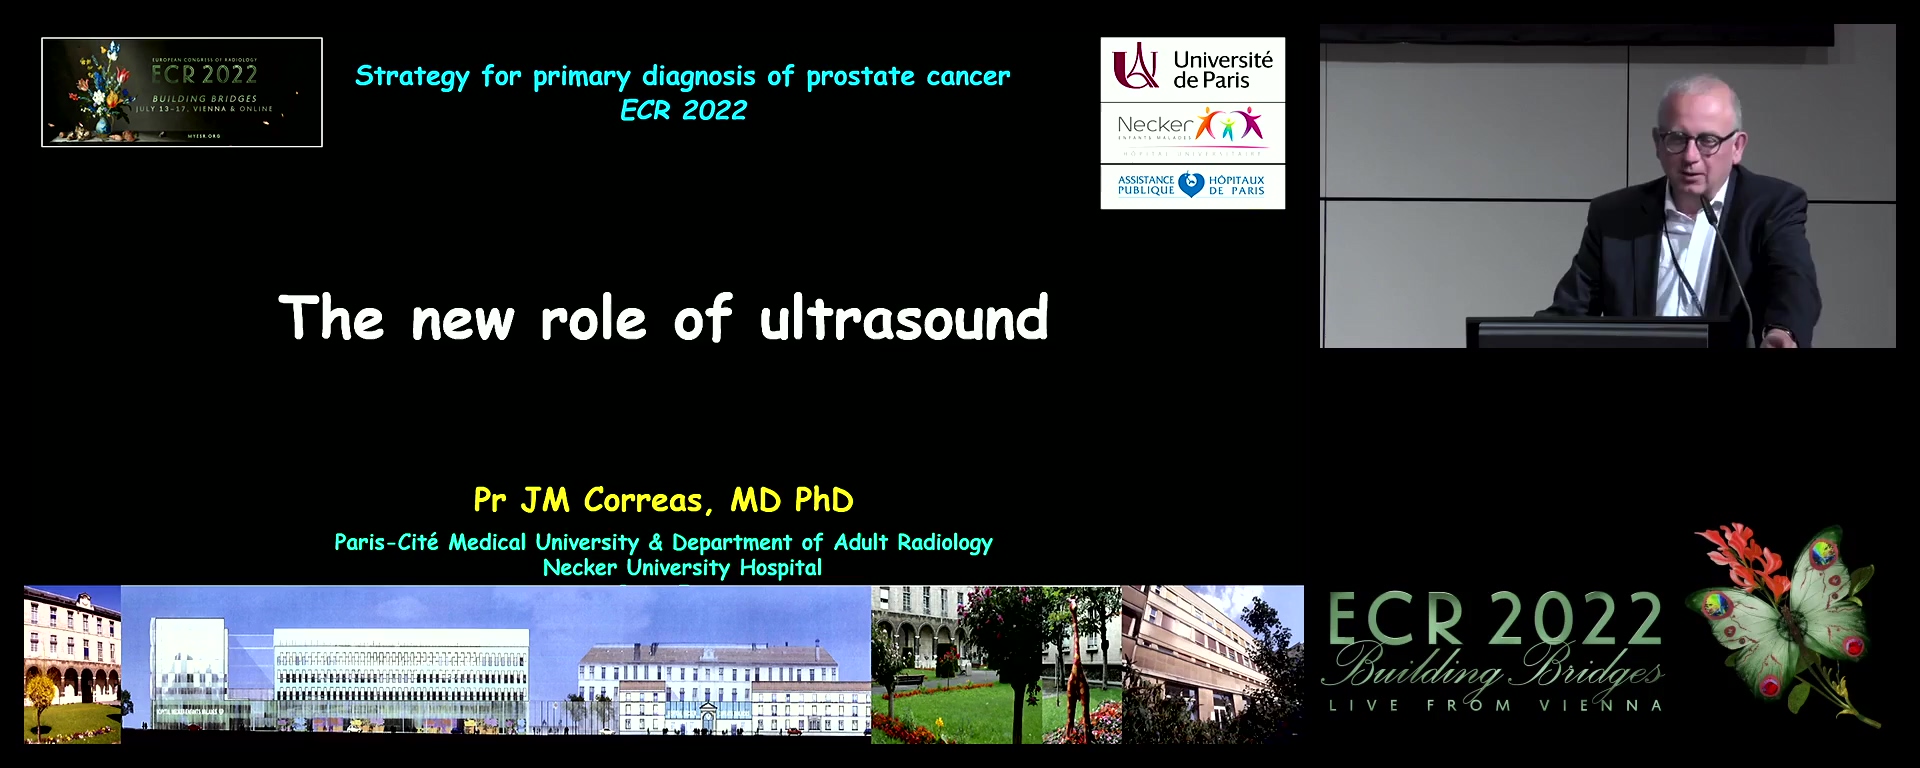 The new role of ultrasound